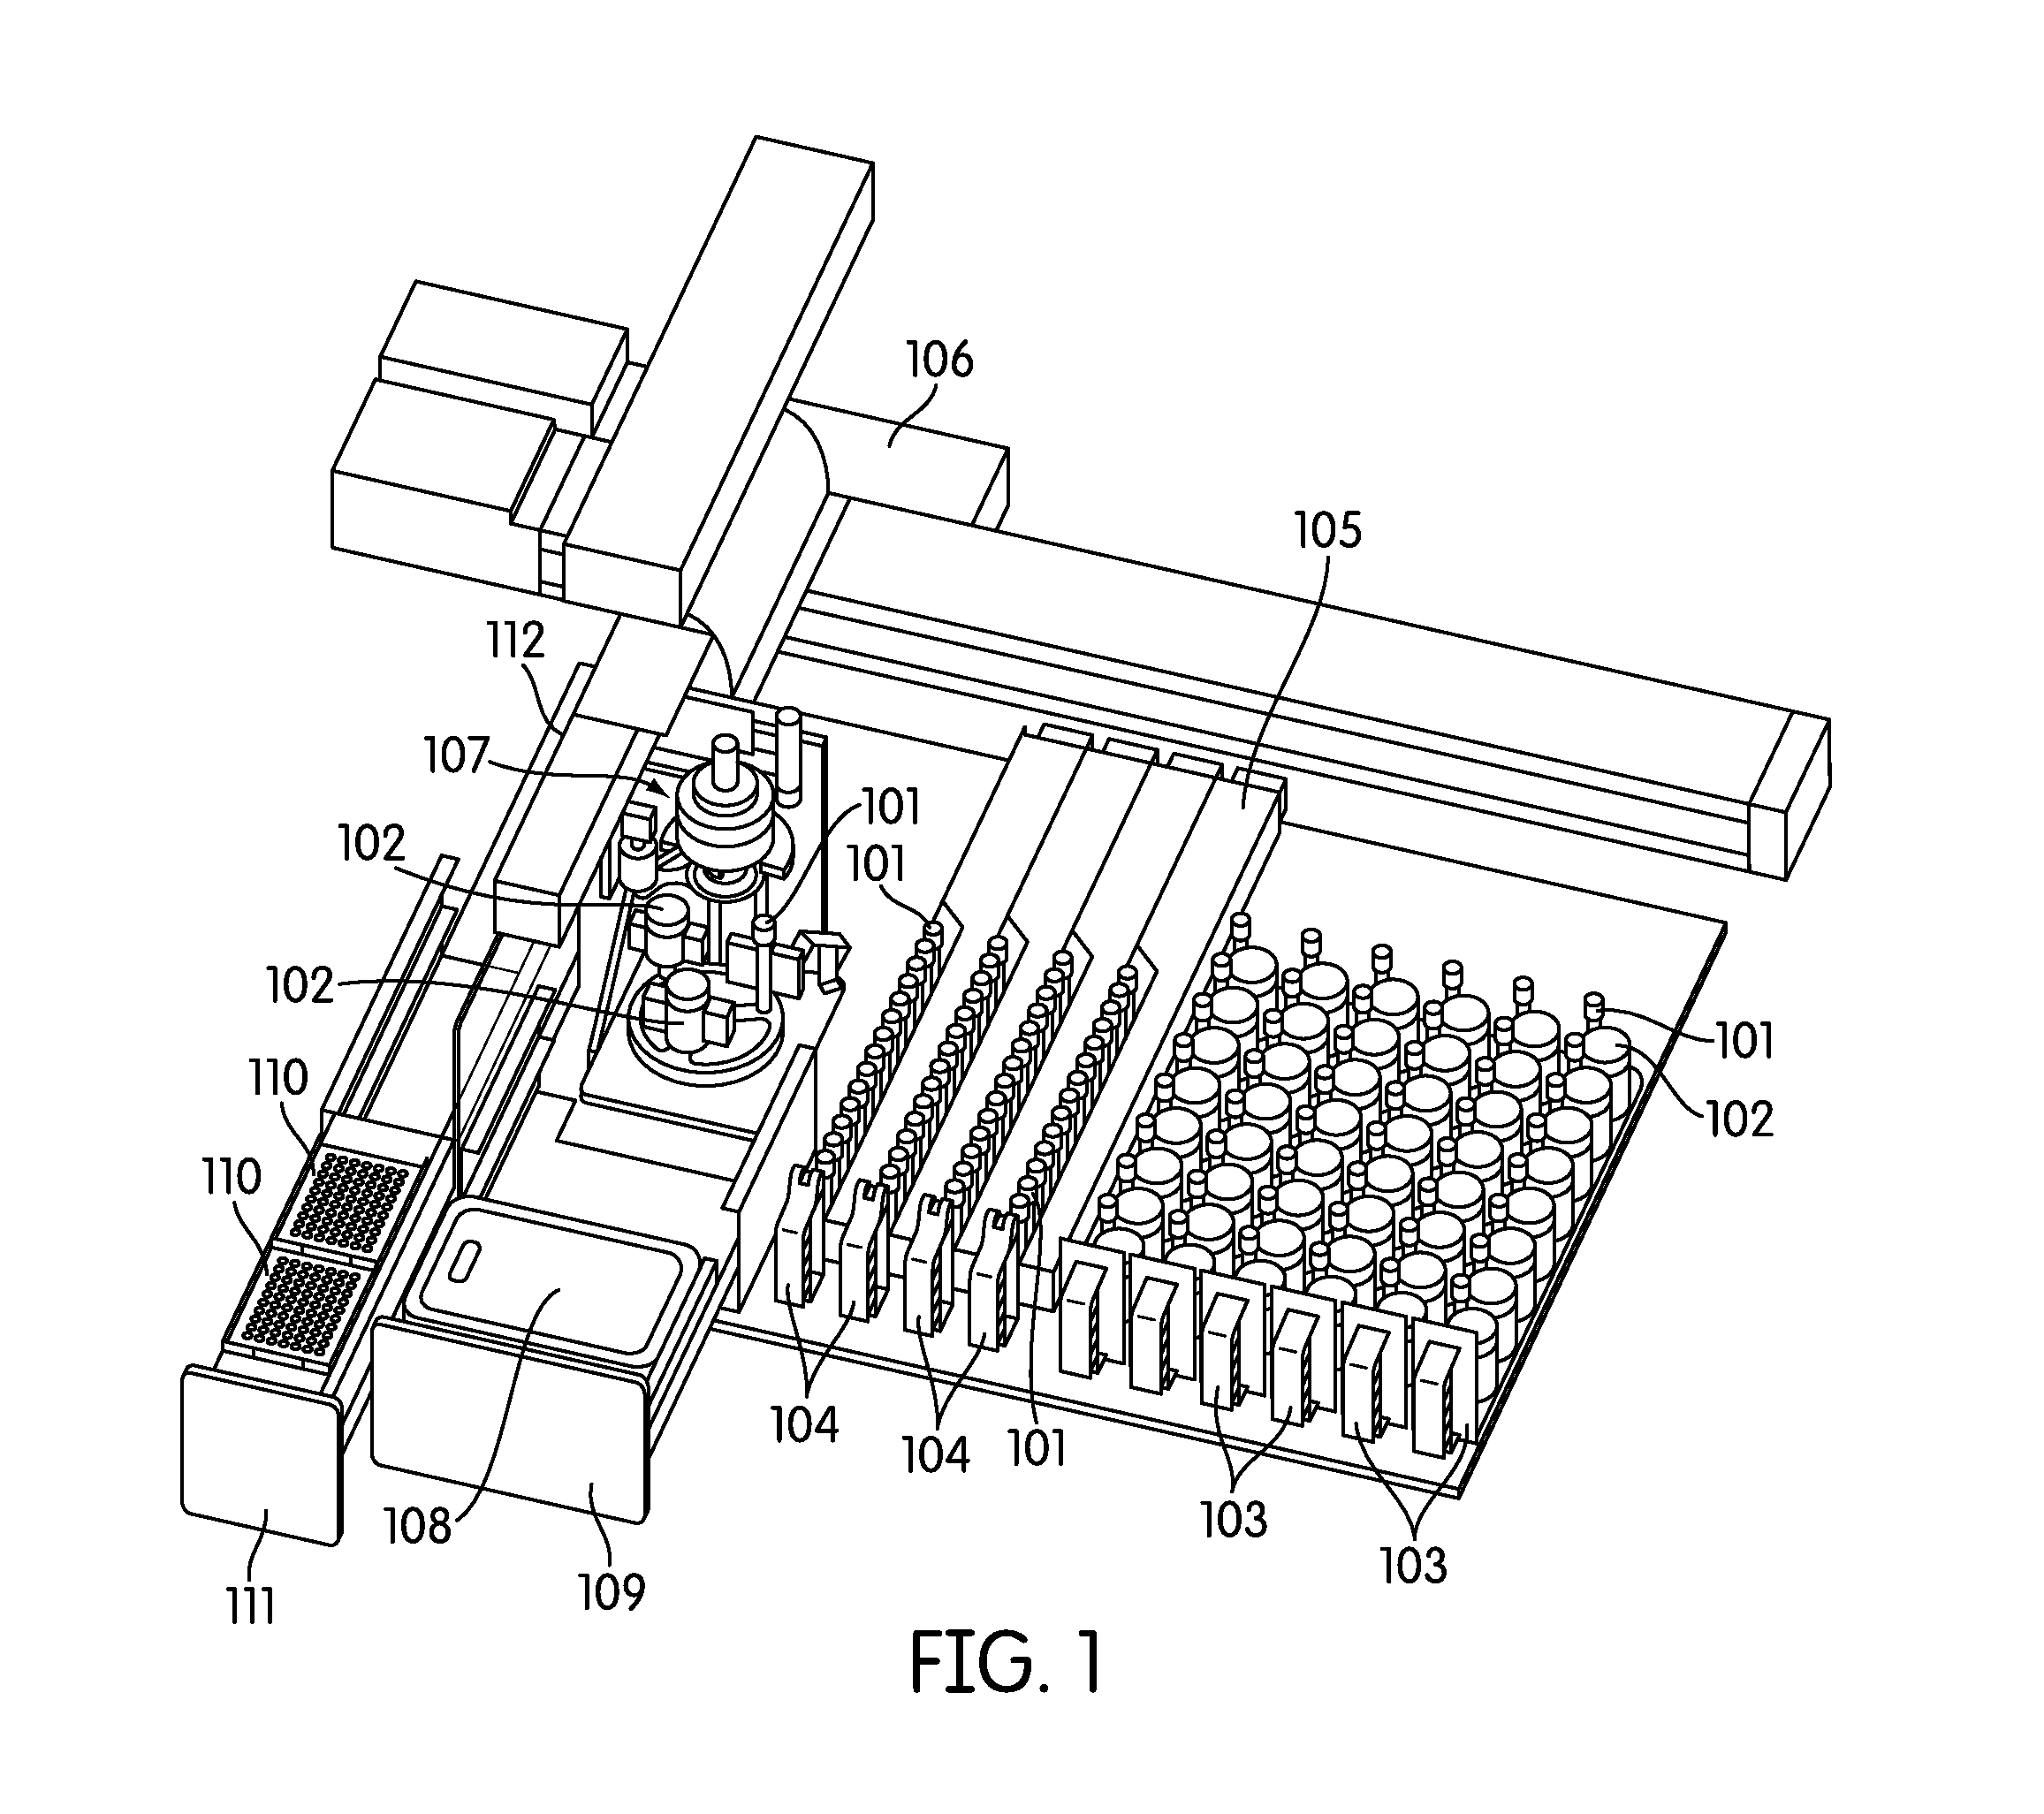 Automated sample handling instrumentation, systems, processes, and methods